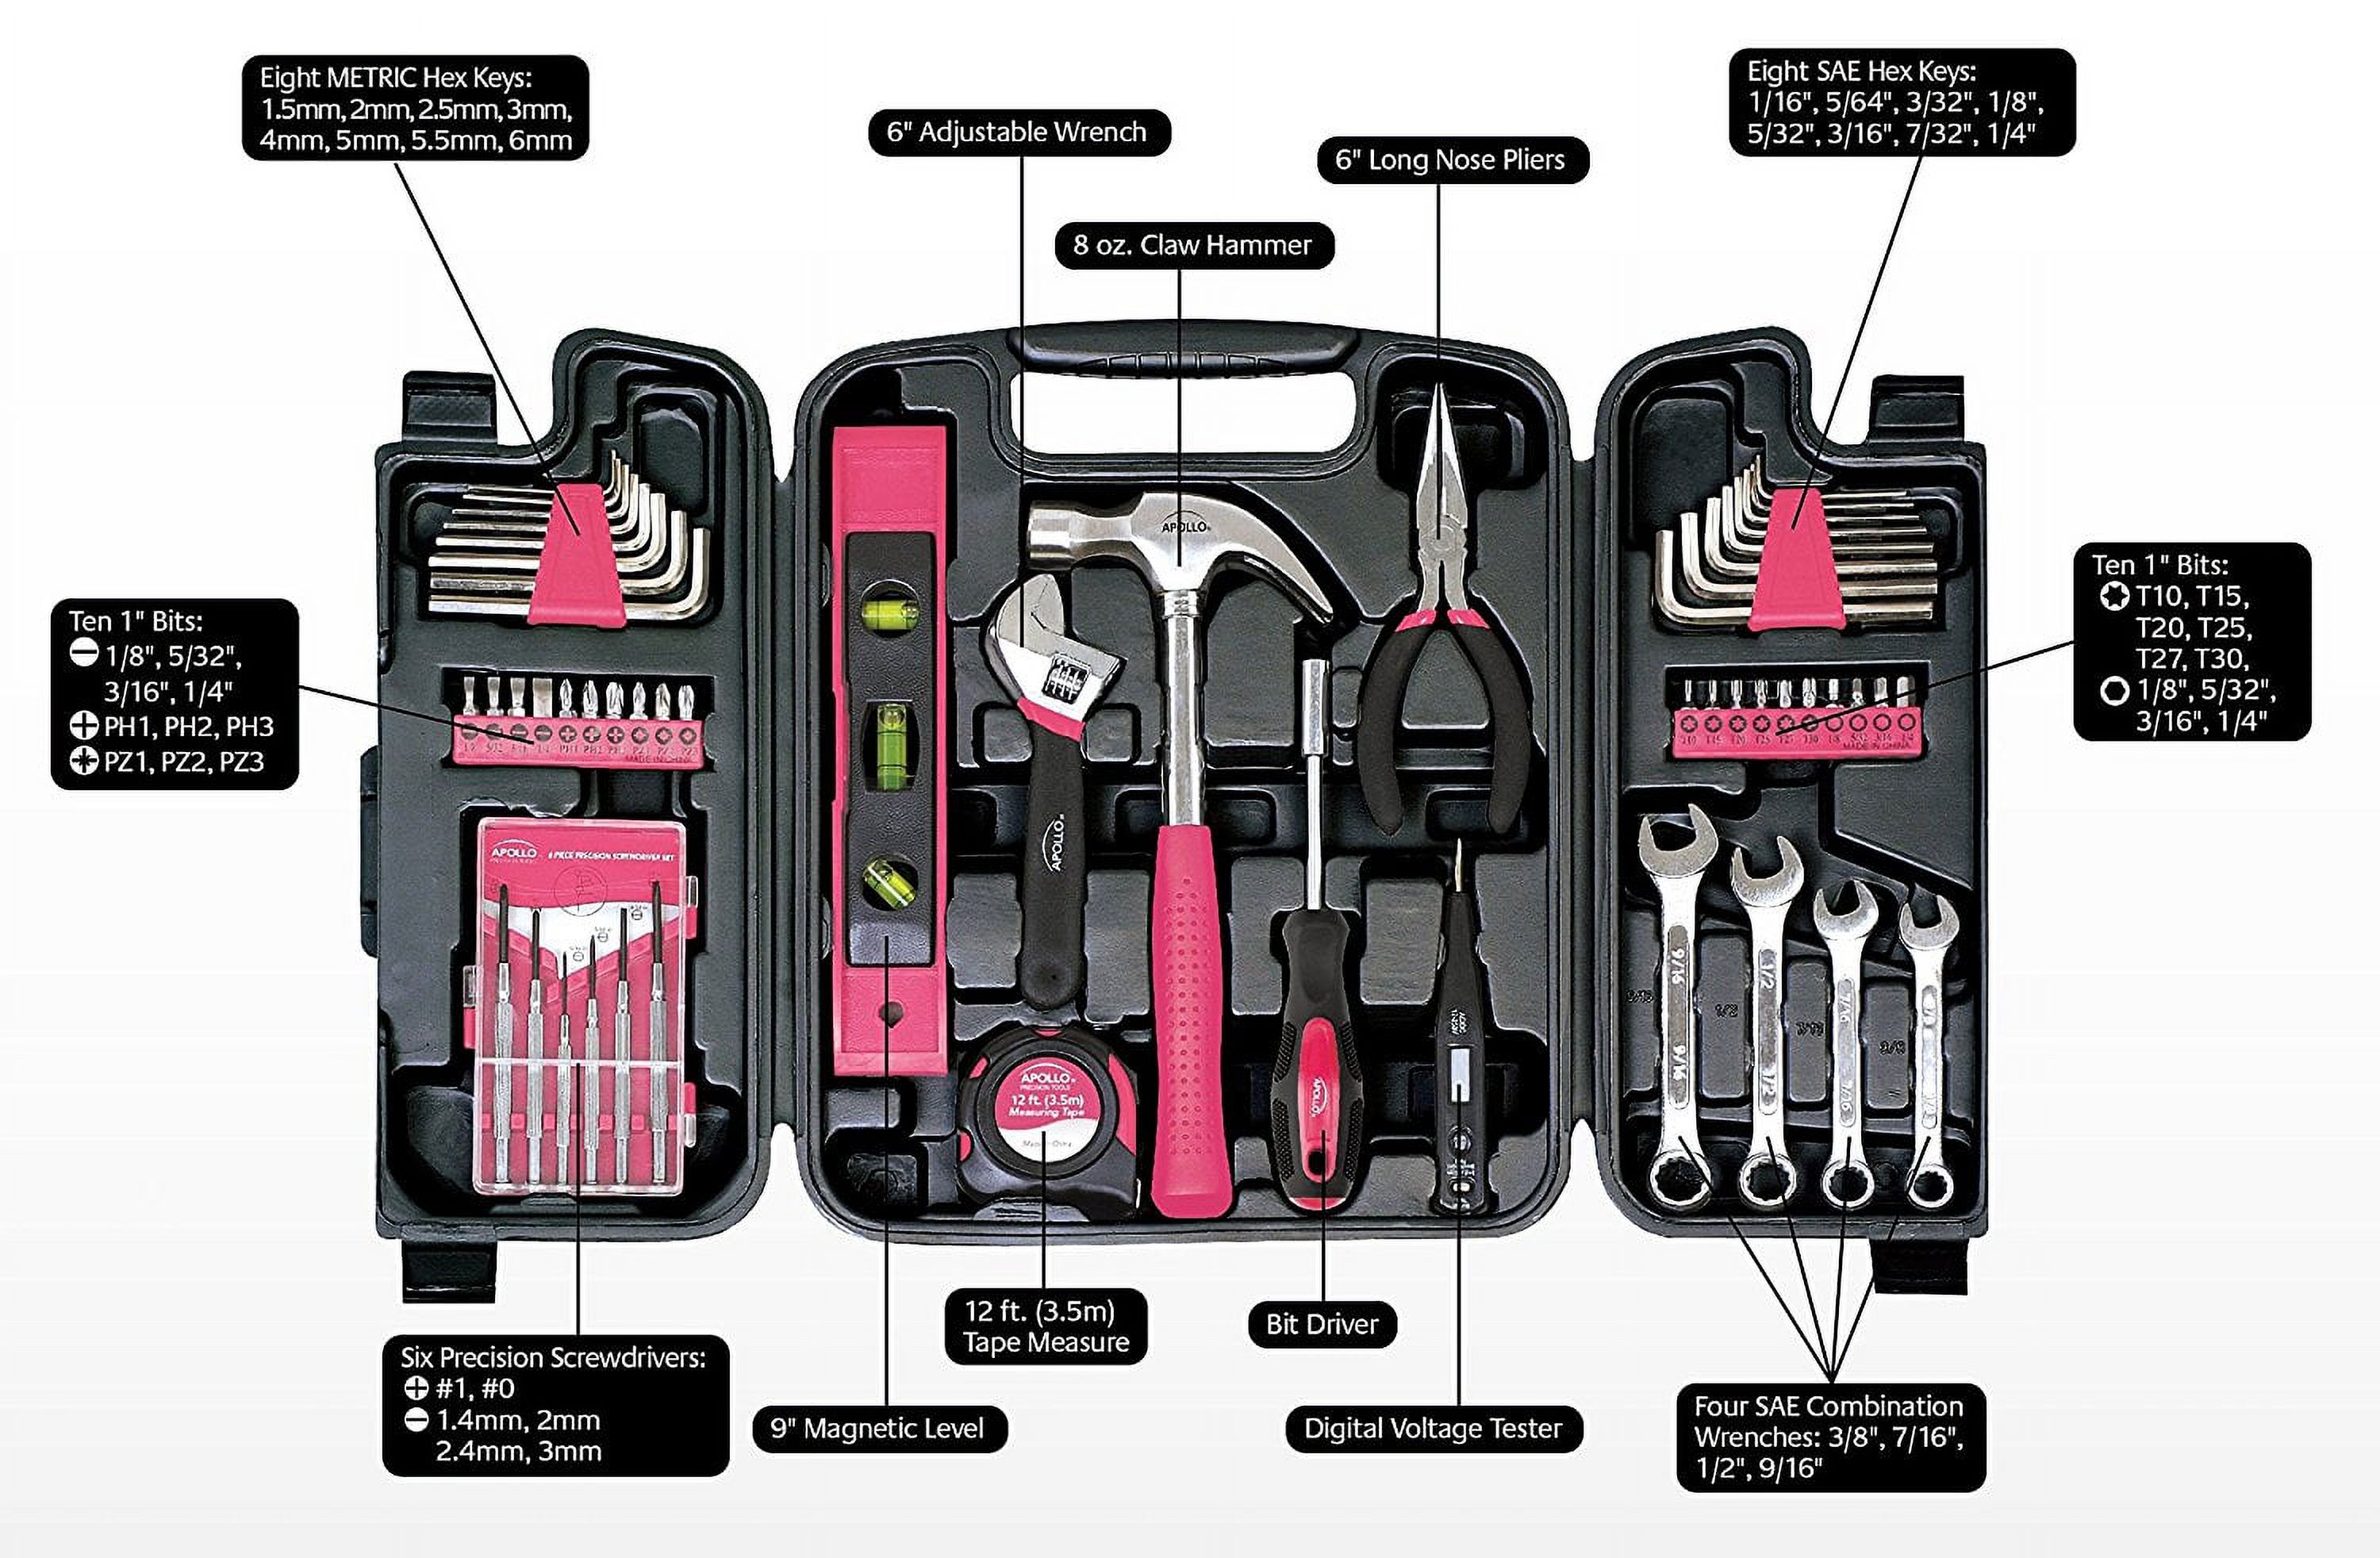 Apollo Tools Dt9408 53 Piece Household Tool Set With Wrenches, Precision Screwdriver Set And Most Reached For Hand Tools In Storage Case - image 2 of 5